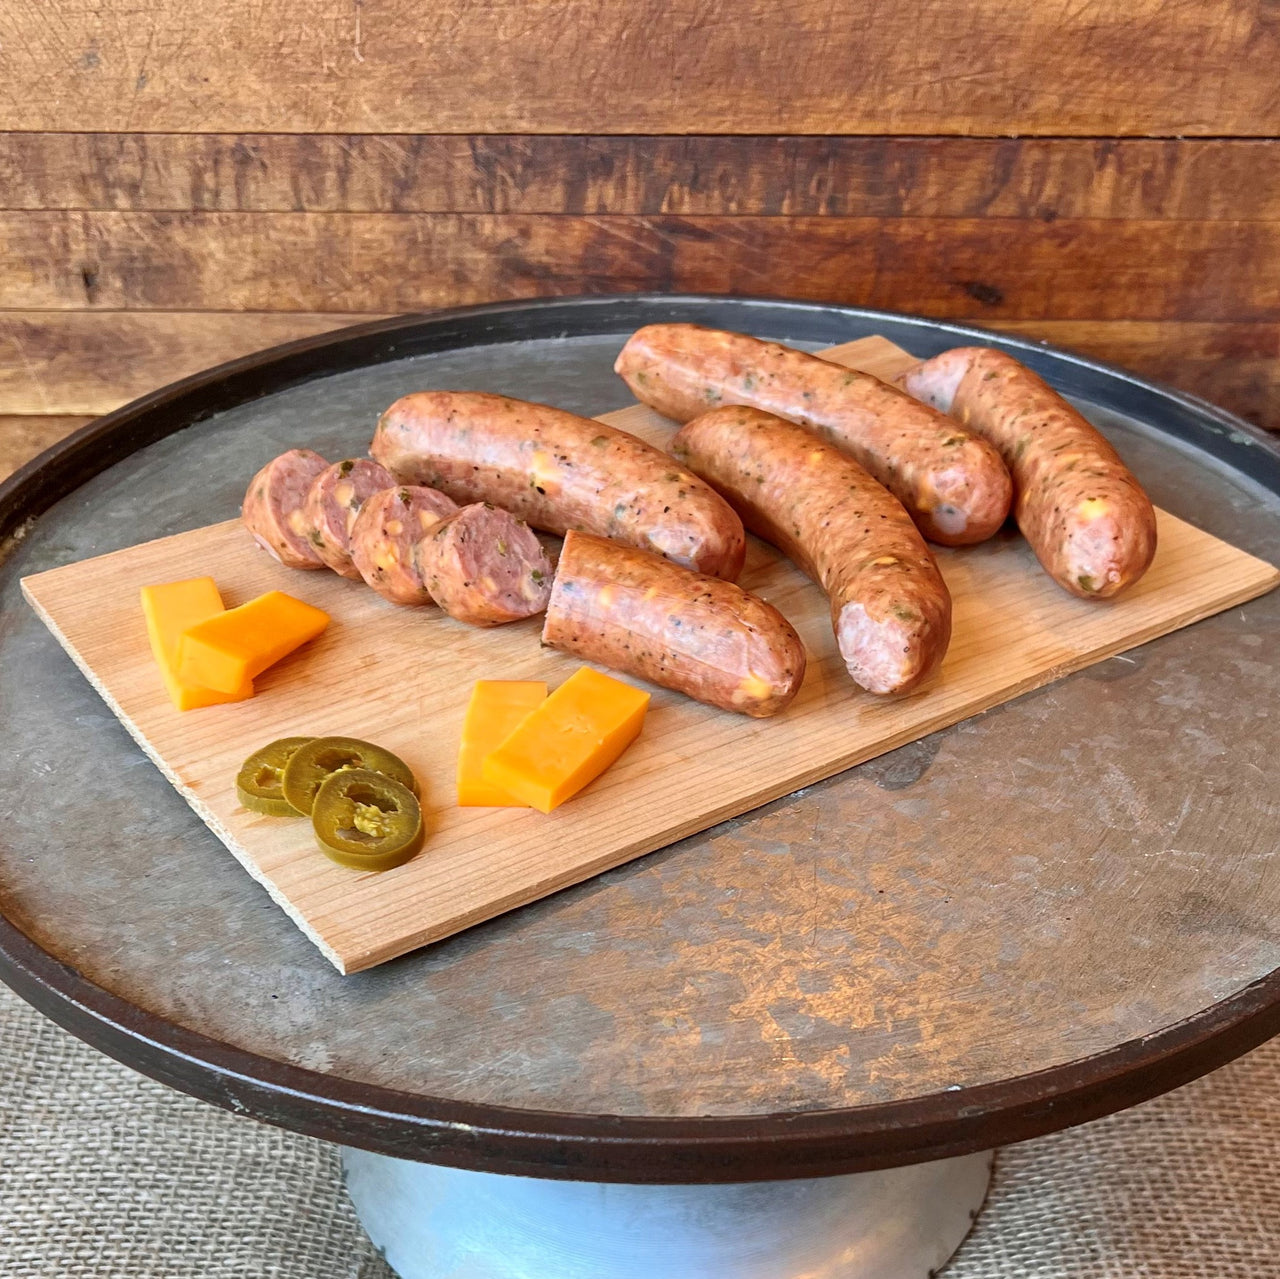 Smoked Cheddar Jalapeno Sausage 3 - 1 lb. Packages